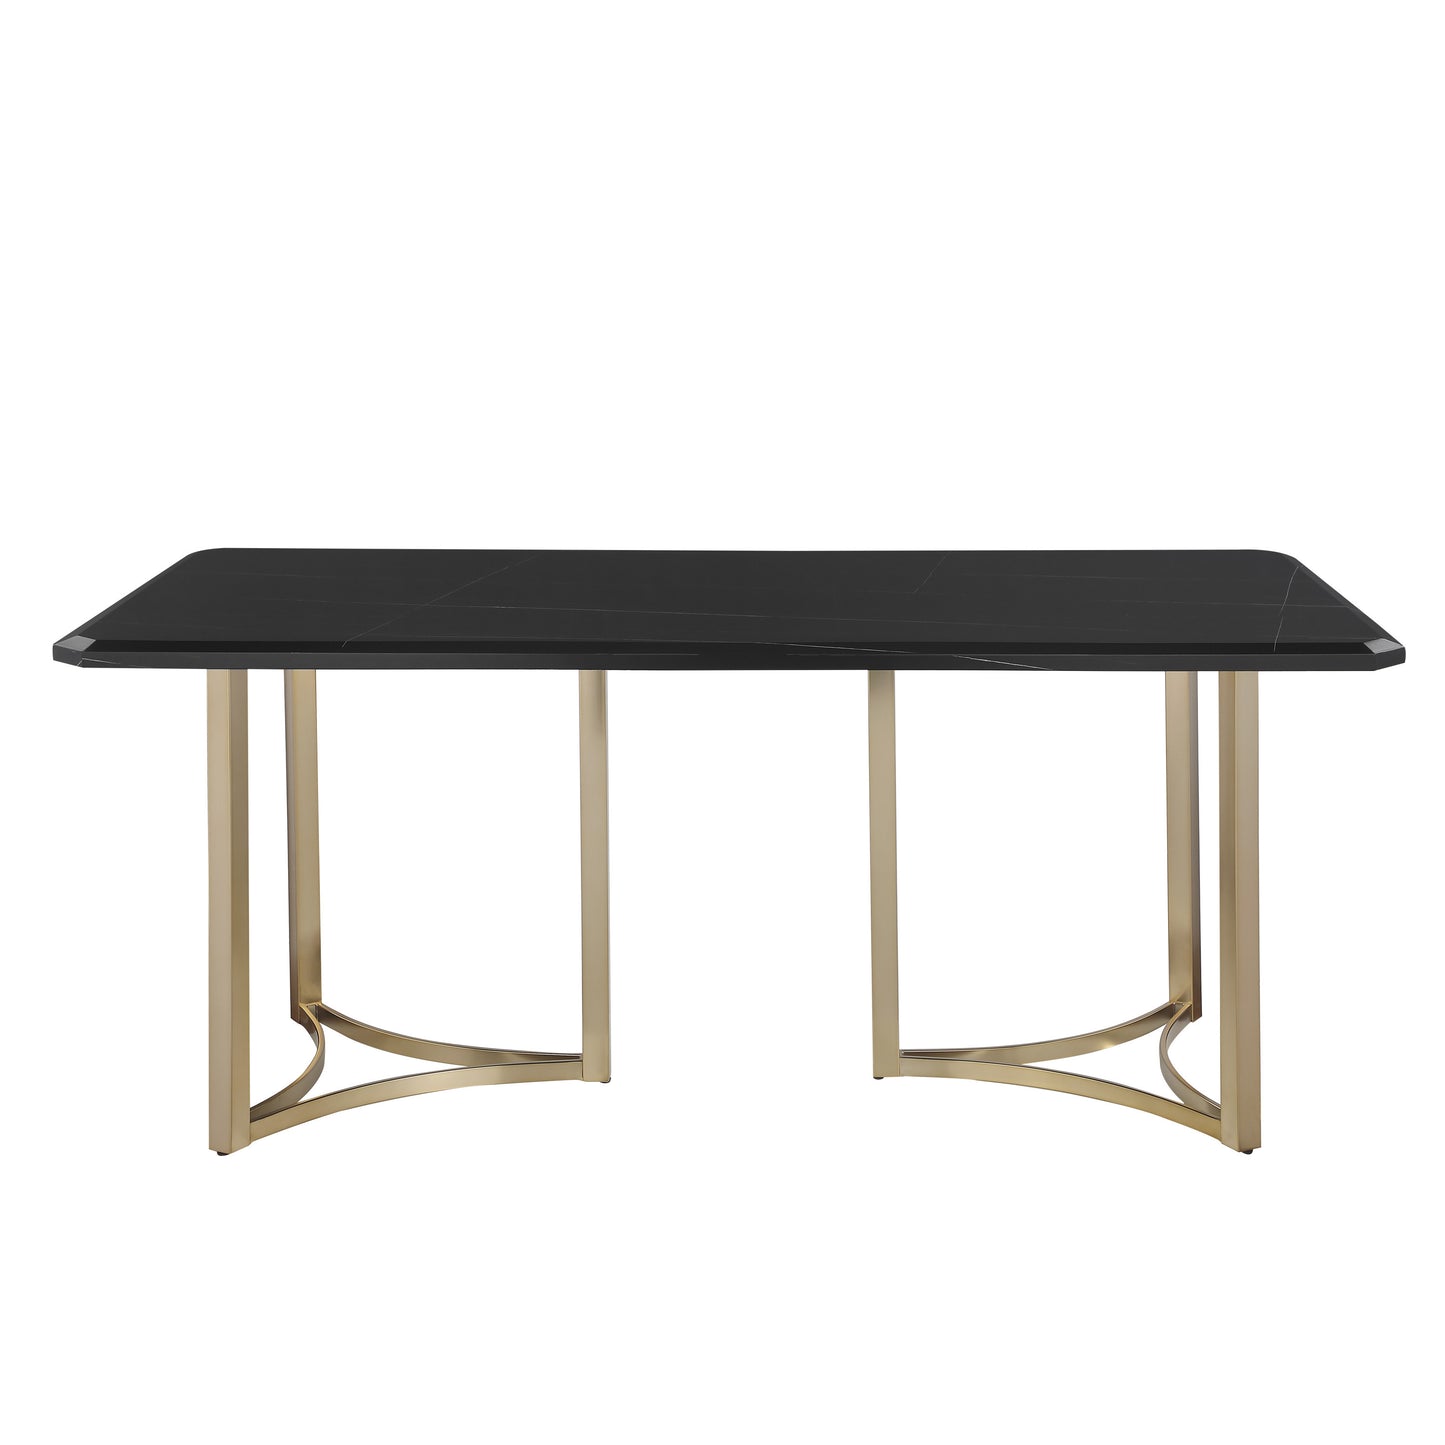 71"x35.5"x30" Contemporary Lauren Gold Black Top Dining Table with Durable Brushed Brass Metal Base,Kitchen Table for 6-8 Person for Living Room, Dining Room,Home and Office